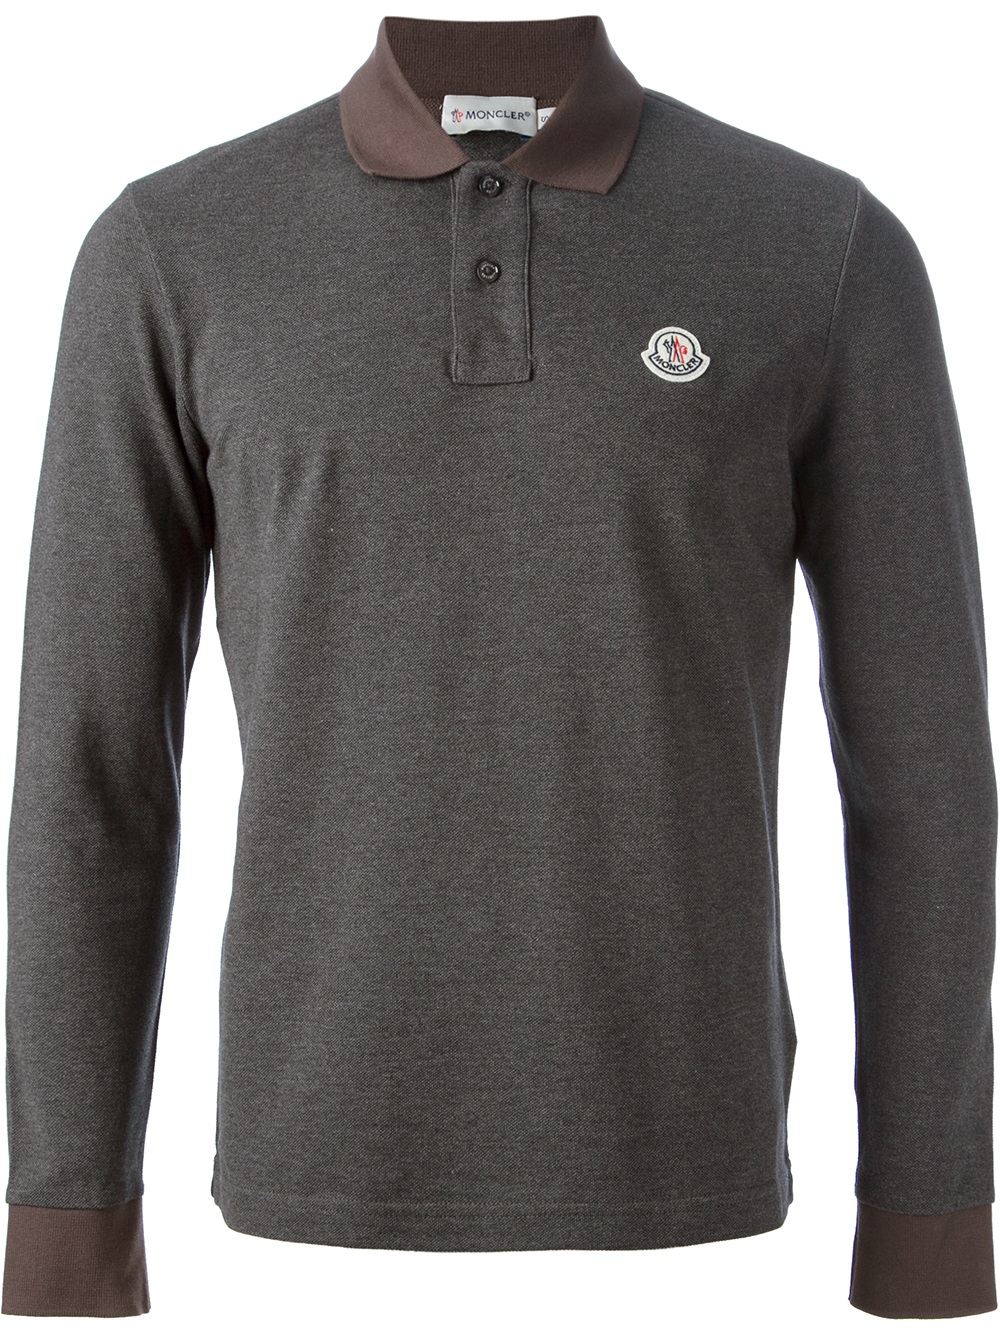 Lyst - Moncler Contrast Detail Polo in Gray for Men